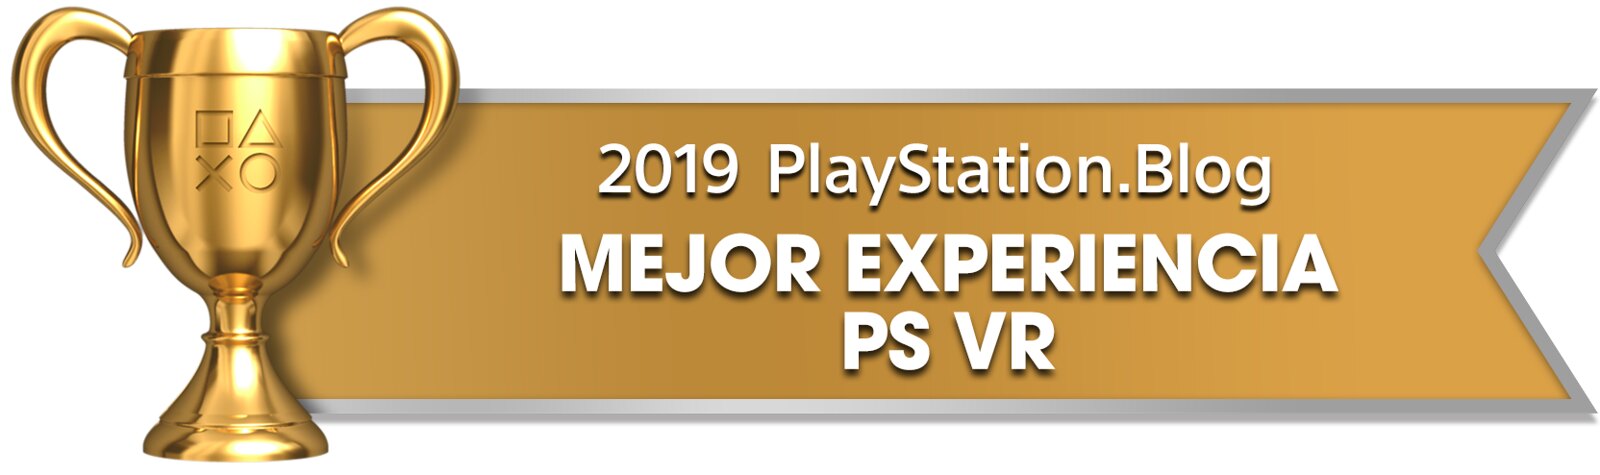 PS Blog Game of the Year 2019 - Best PS VR Experience - 2 - Gold